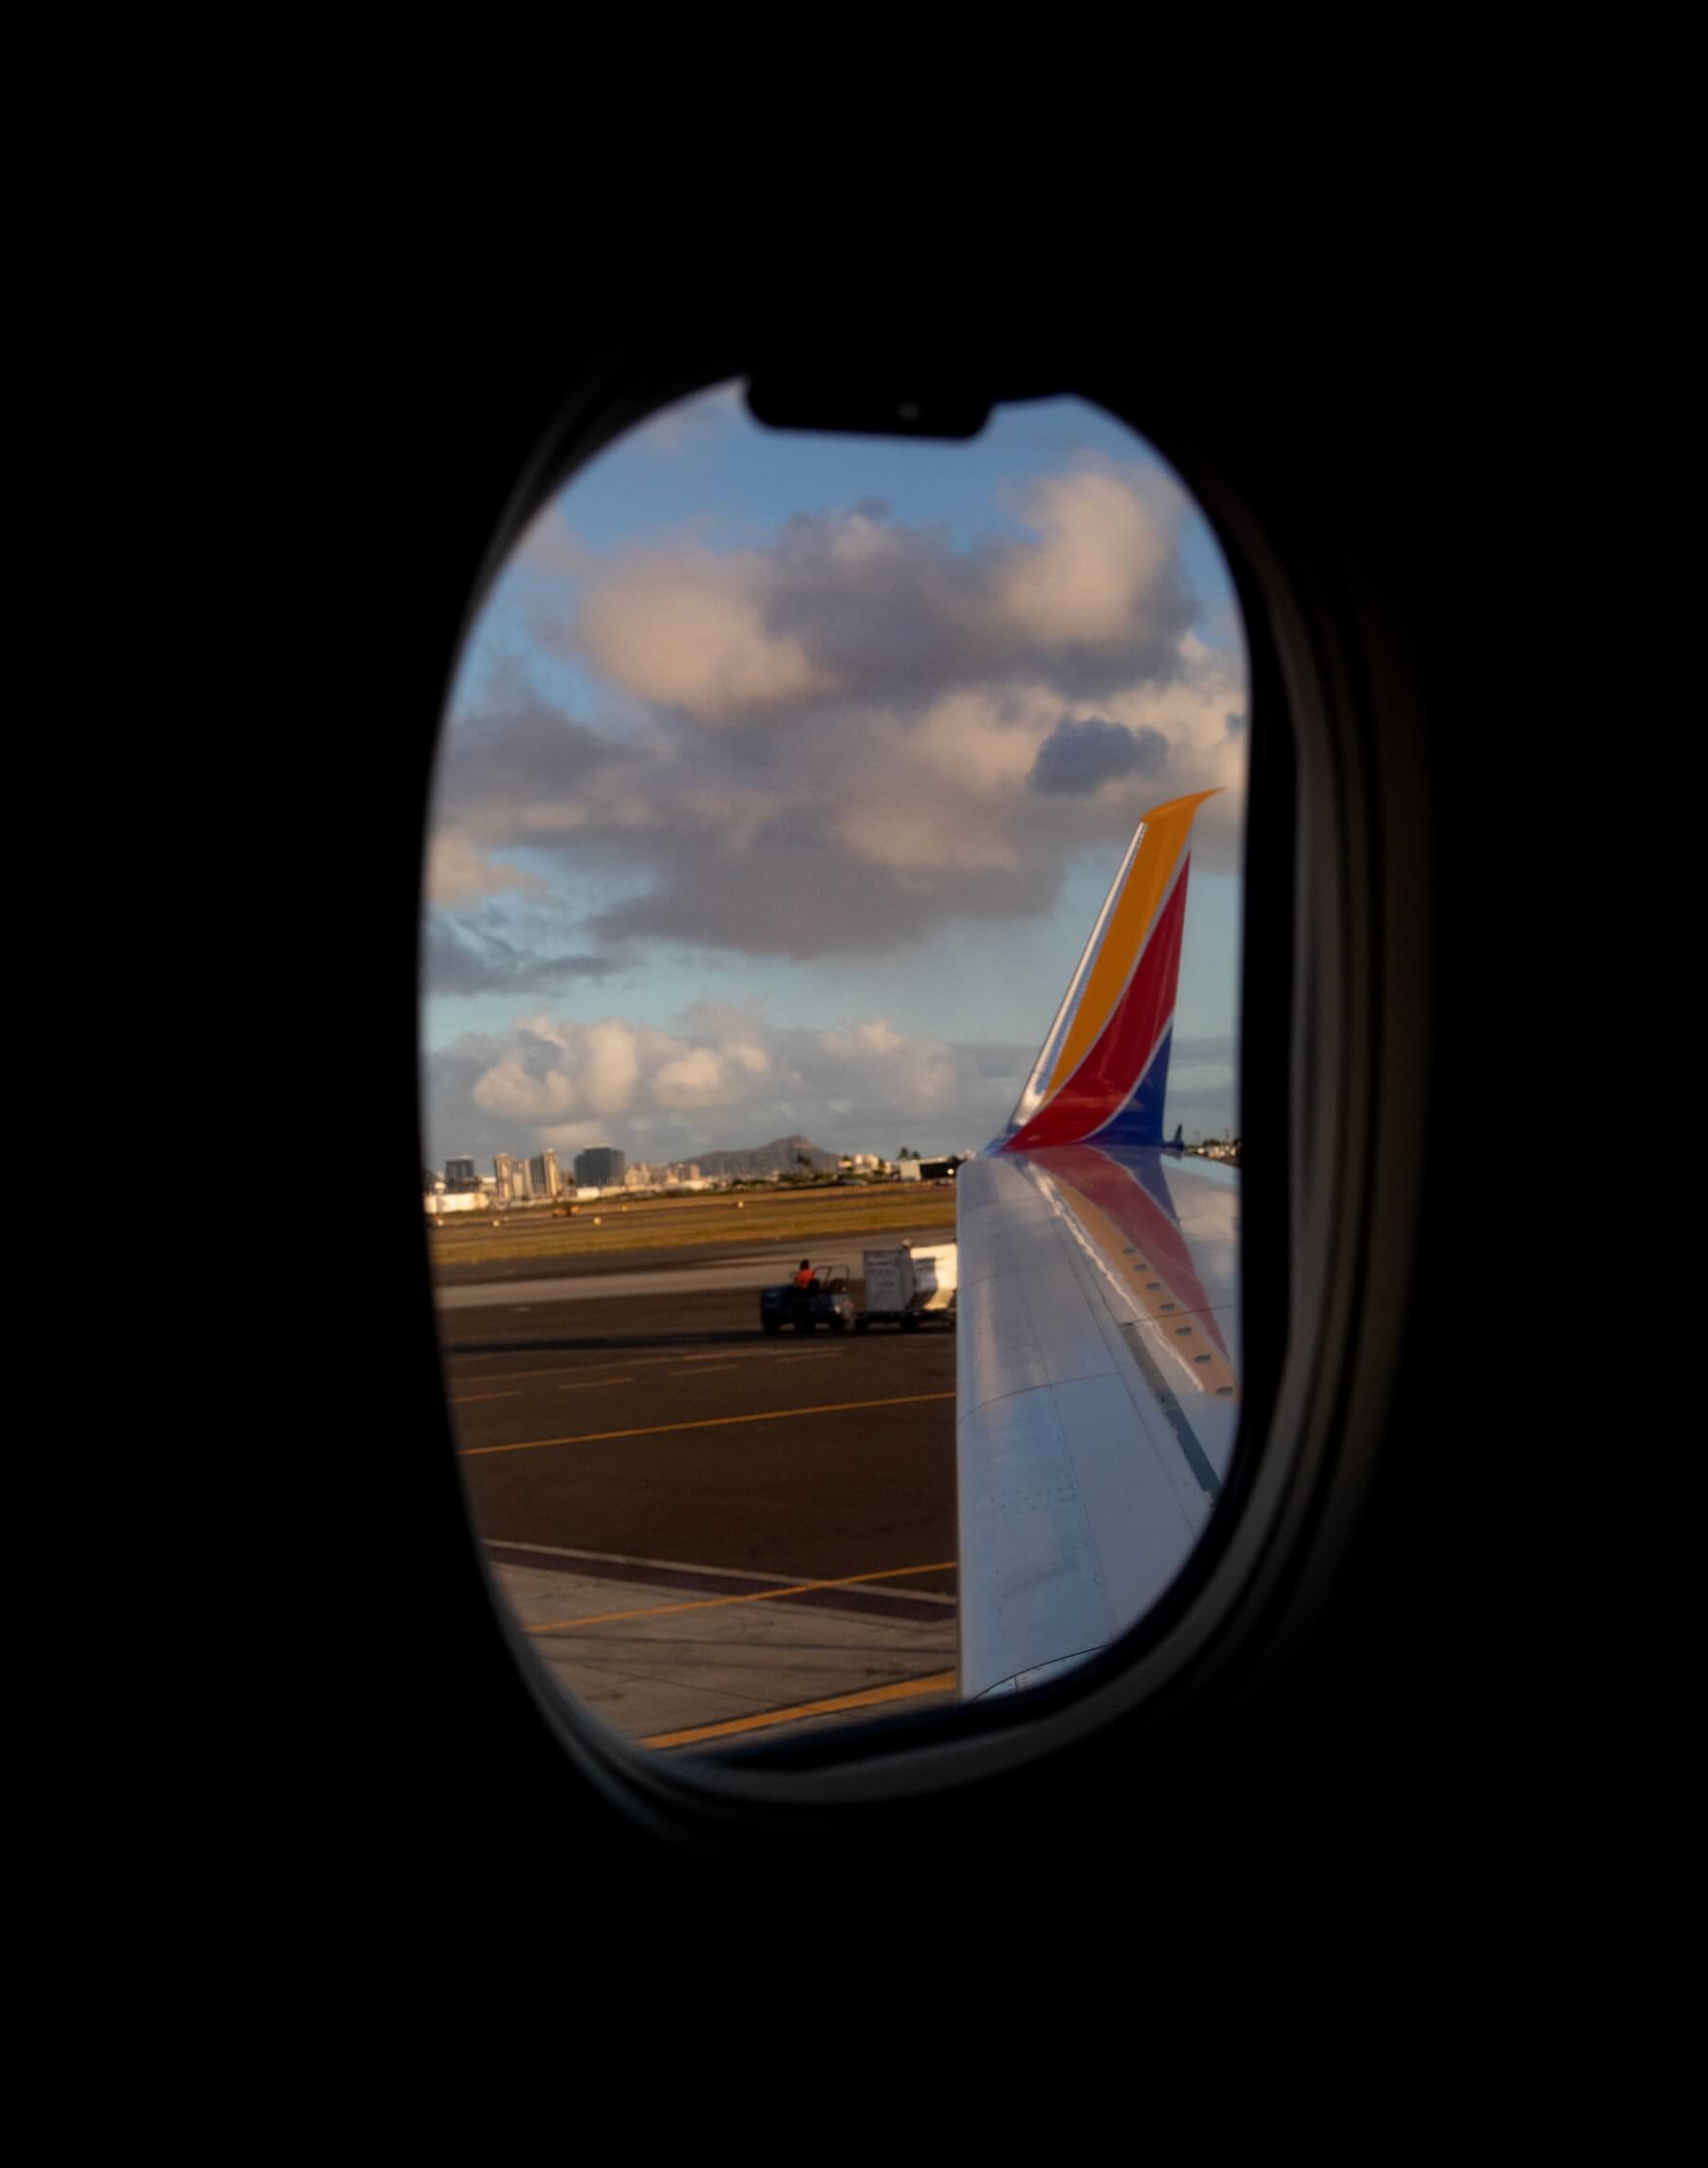 The view from a Southwest airlines plane window